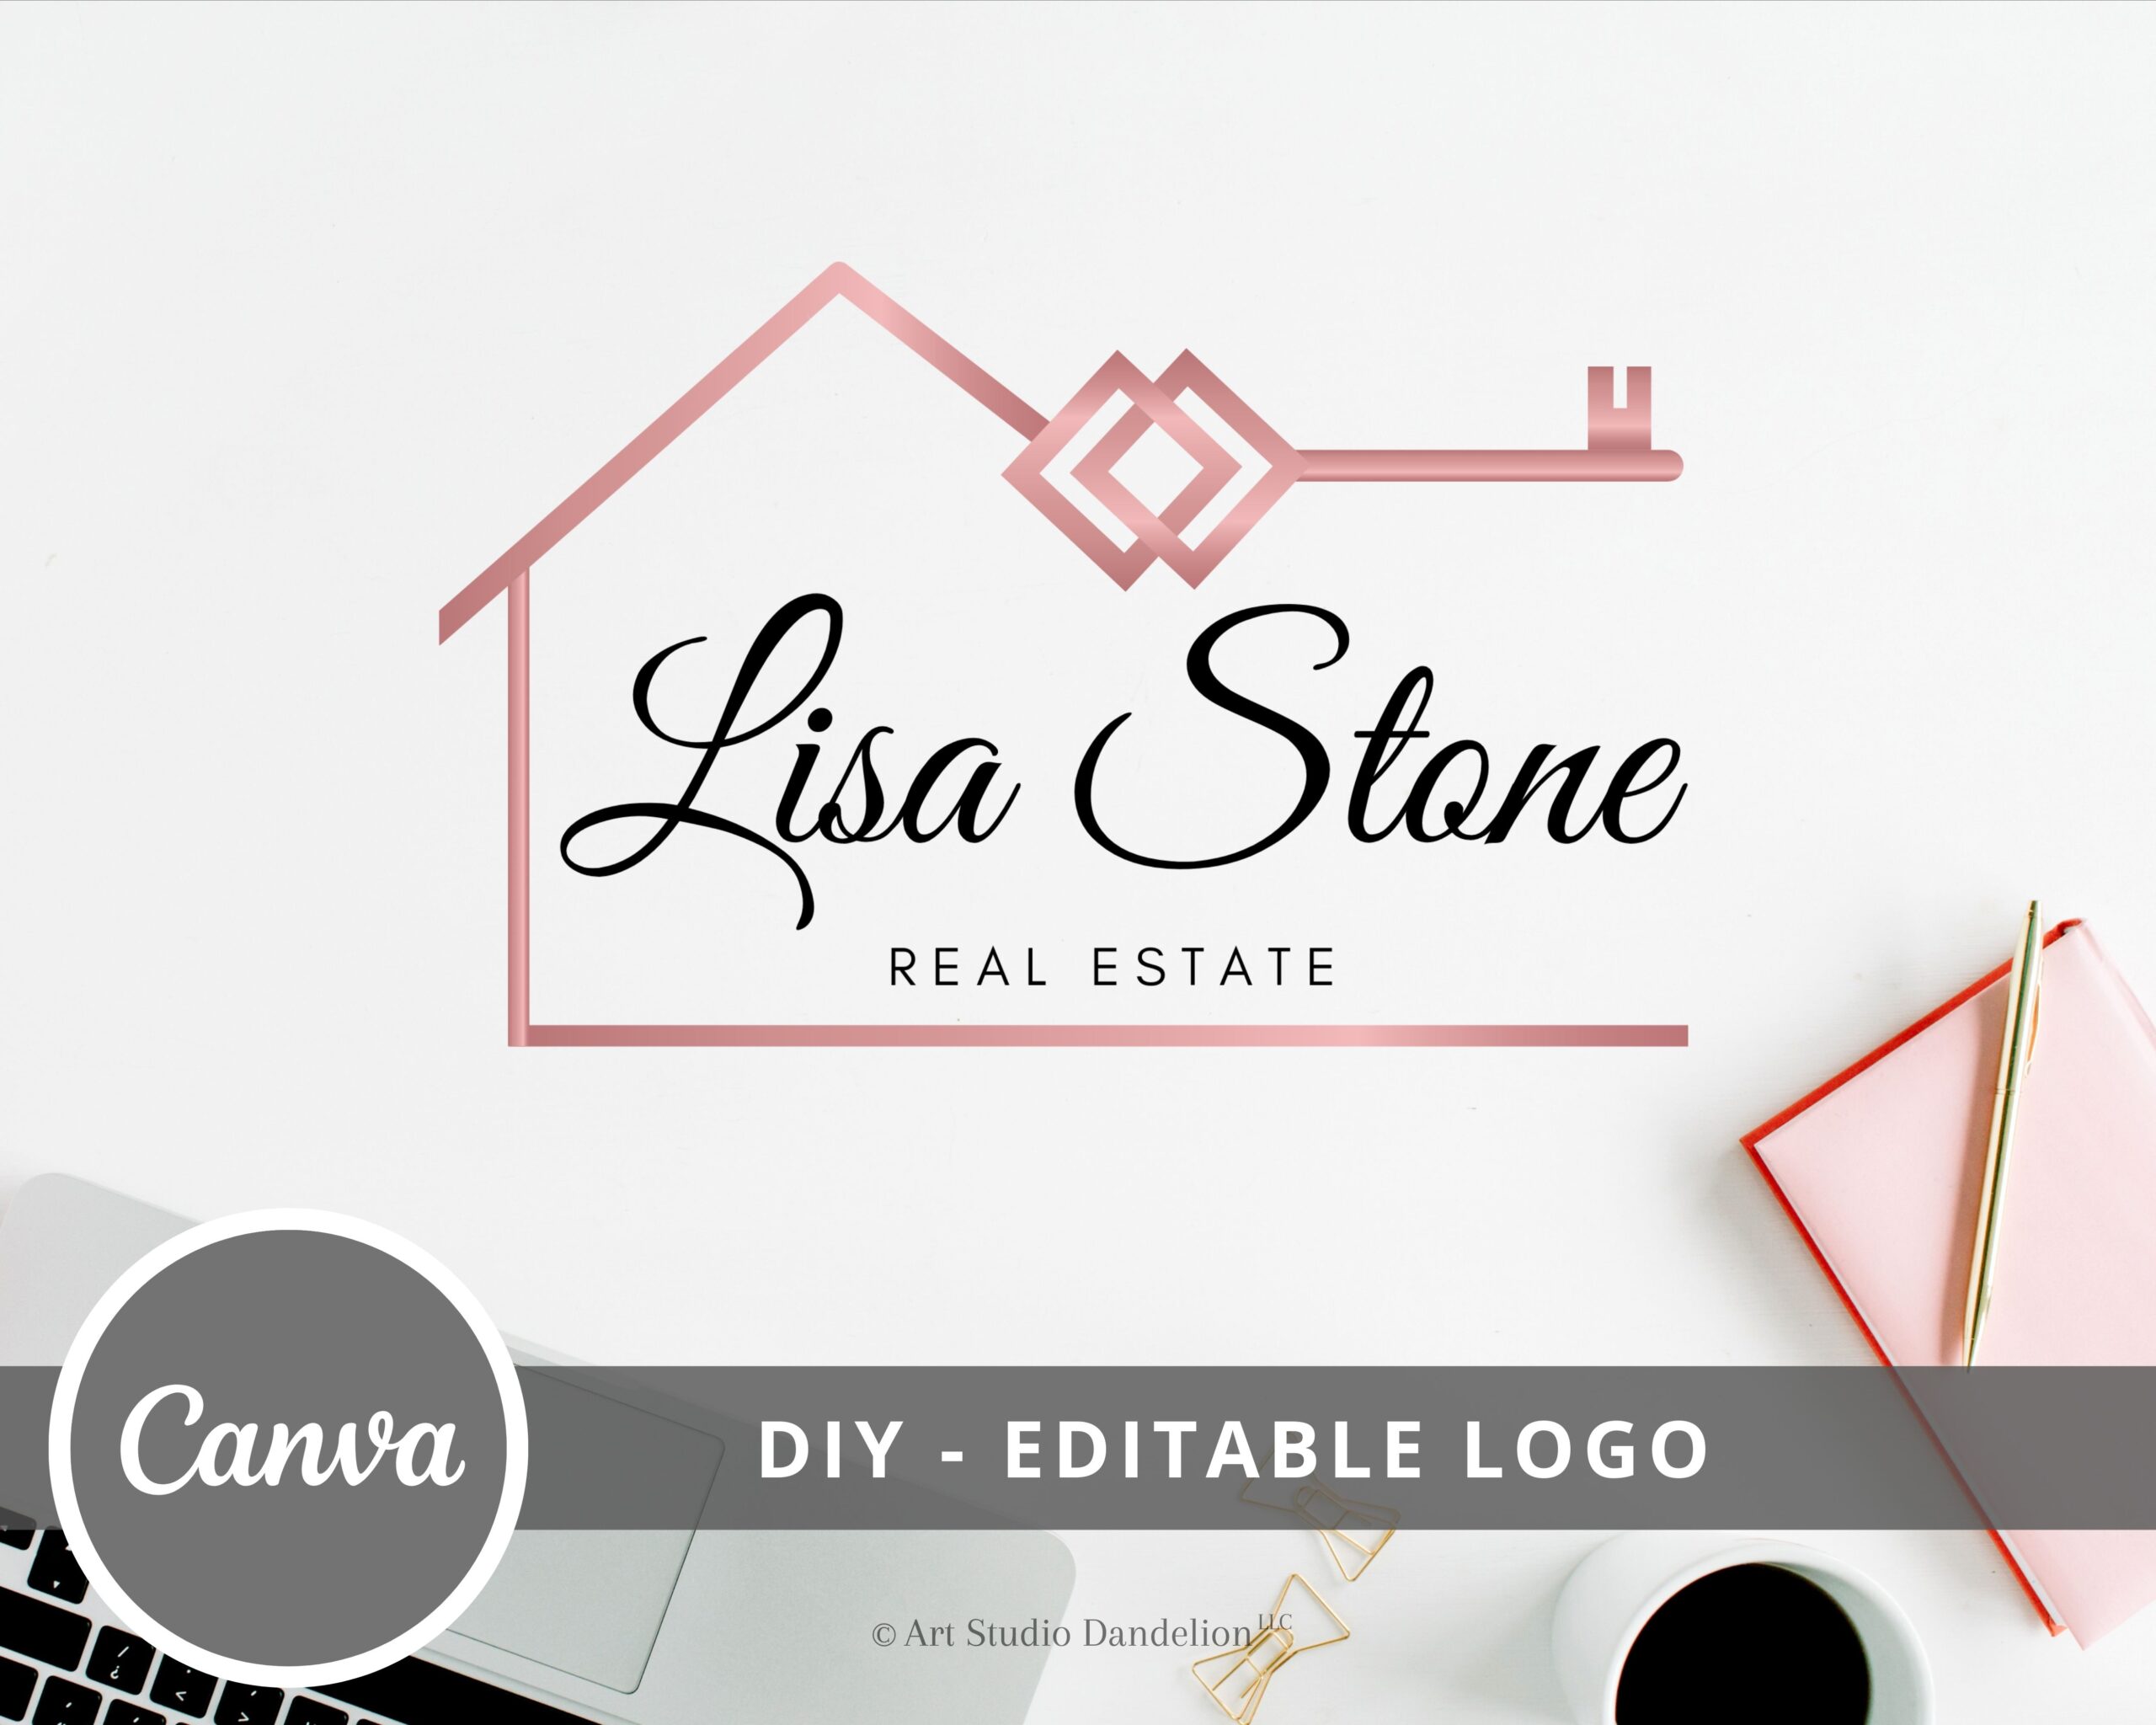 DIY Rose Gold Real Estate Logo Design is an Editable Logo Template for Real Estate Agents. House Signature Logo Design - Instant Access